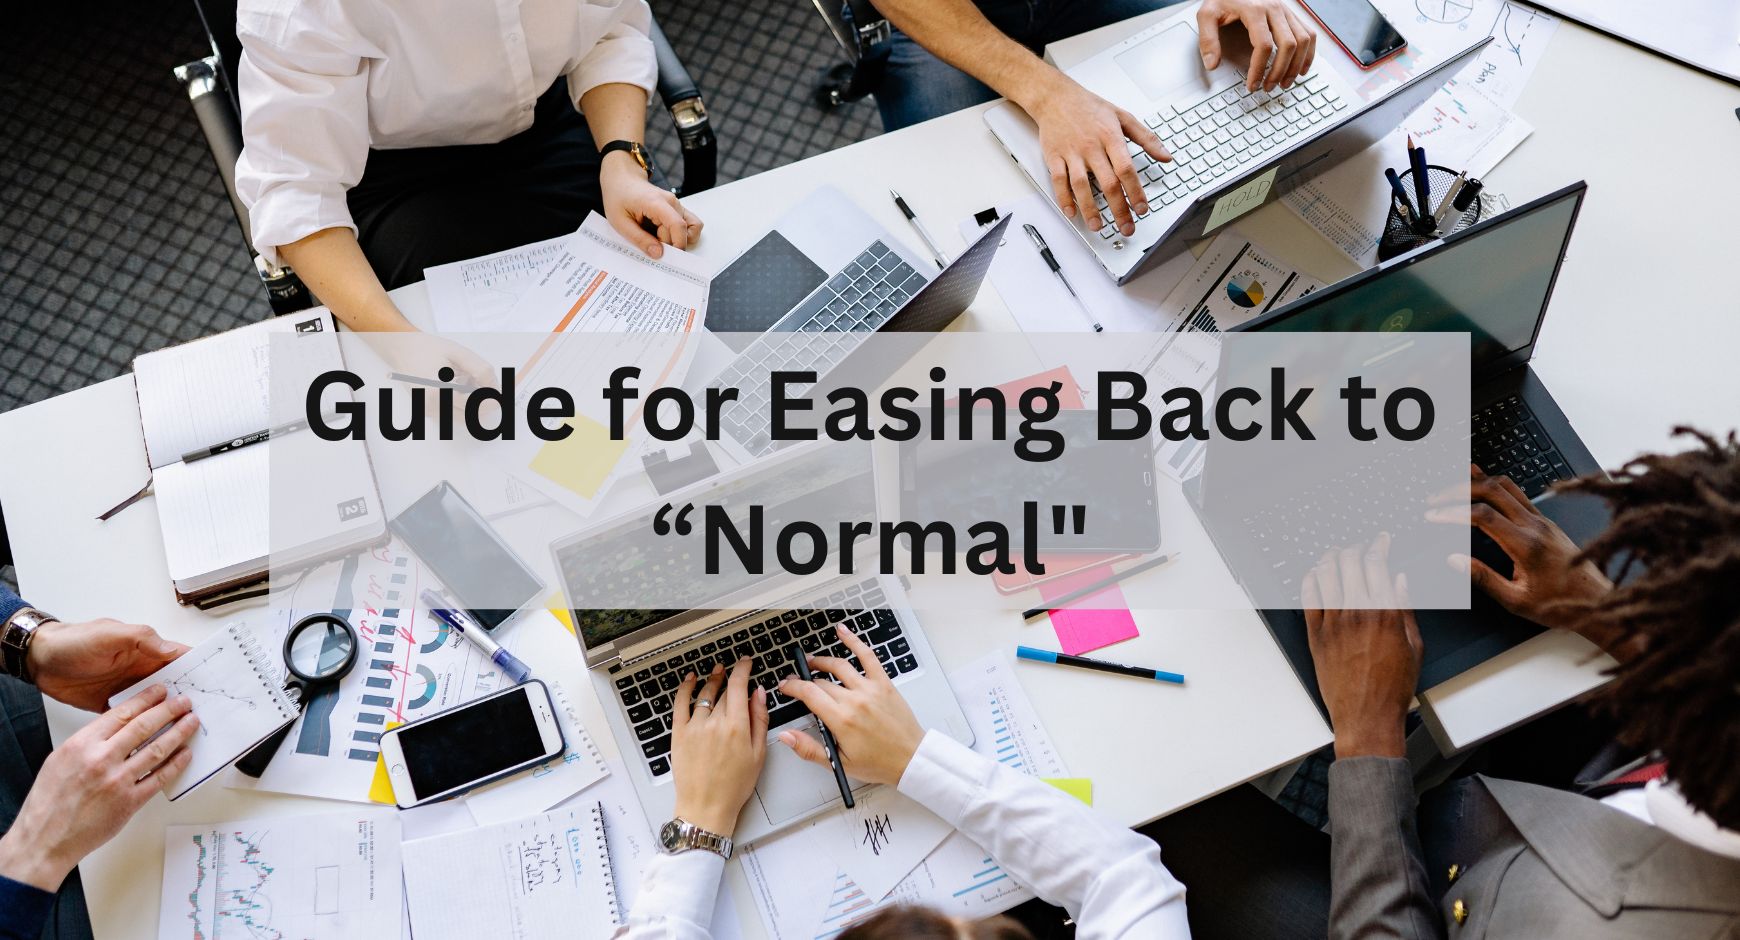 A worktable with five people sitting at it under words that read "Guide for Easing Back to 'Normal'"